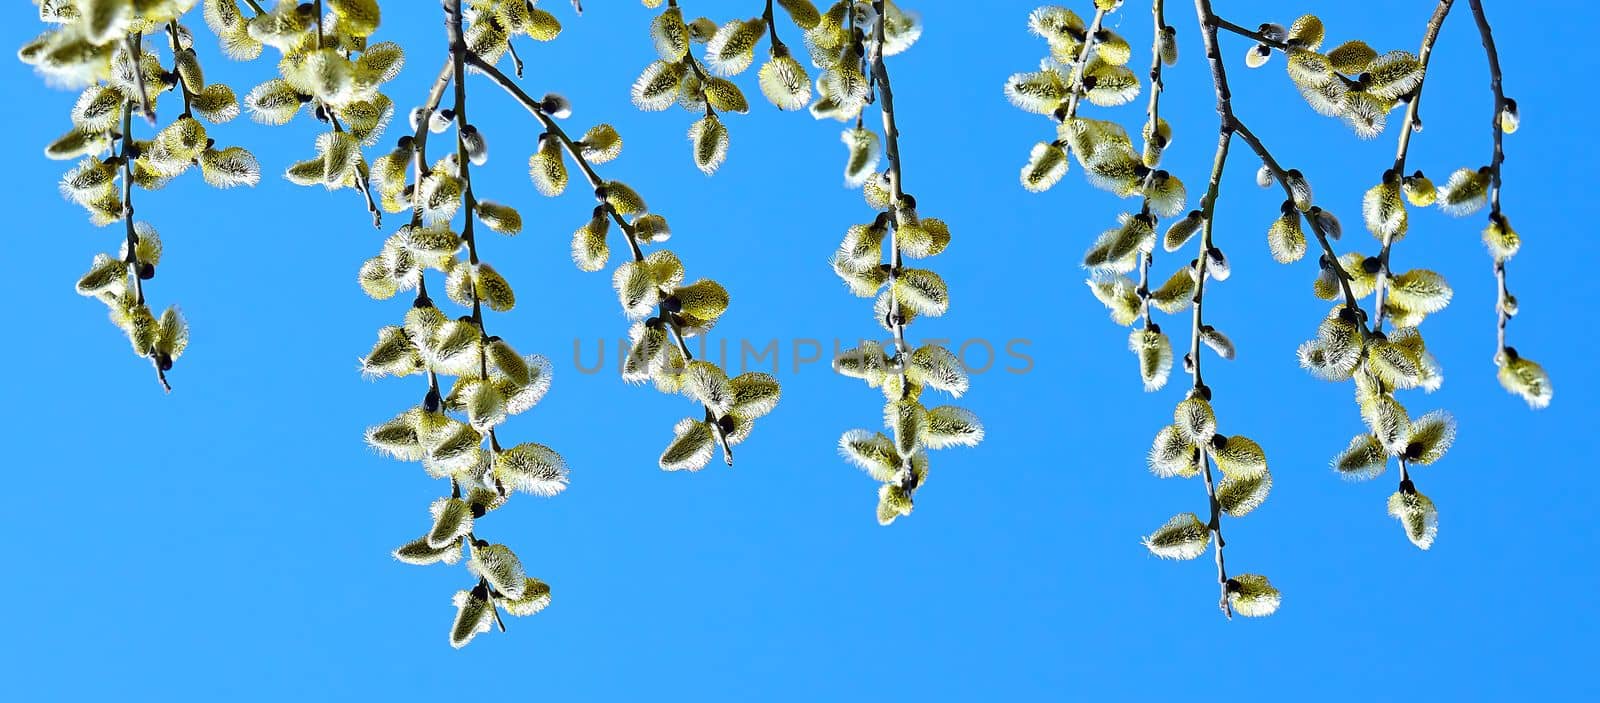 Goat willow, willow, blooms in spring on a clear day by Hil